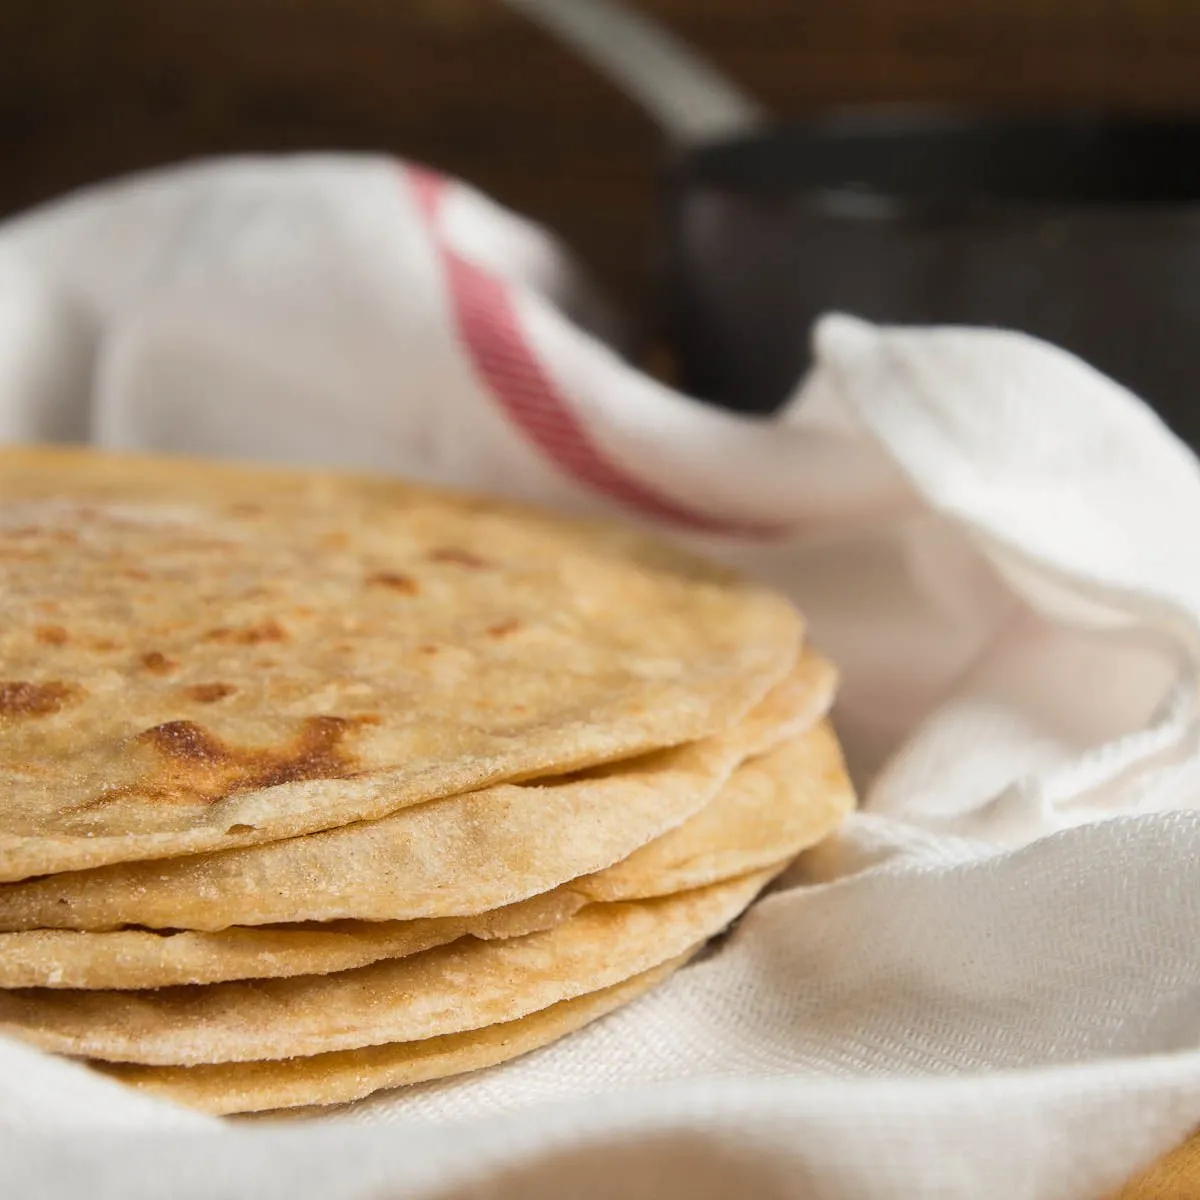 How To Make Paratha Indian Flat Bread At Home - a recipe for whole wheat, no yeast flatbread